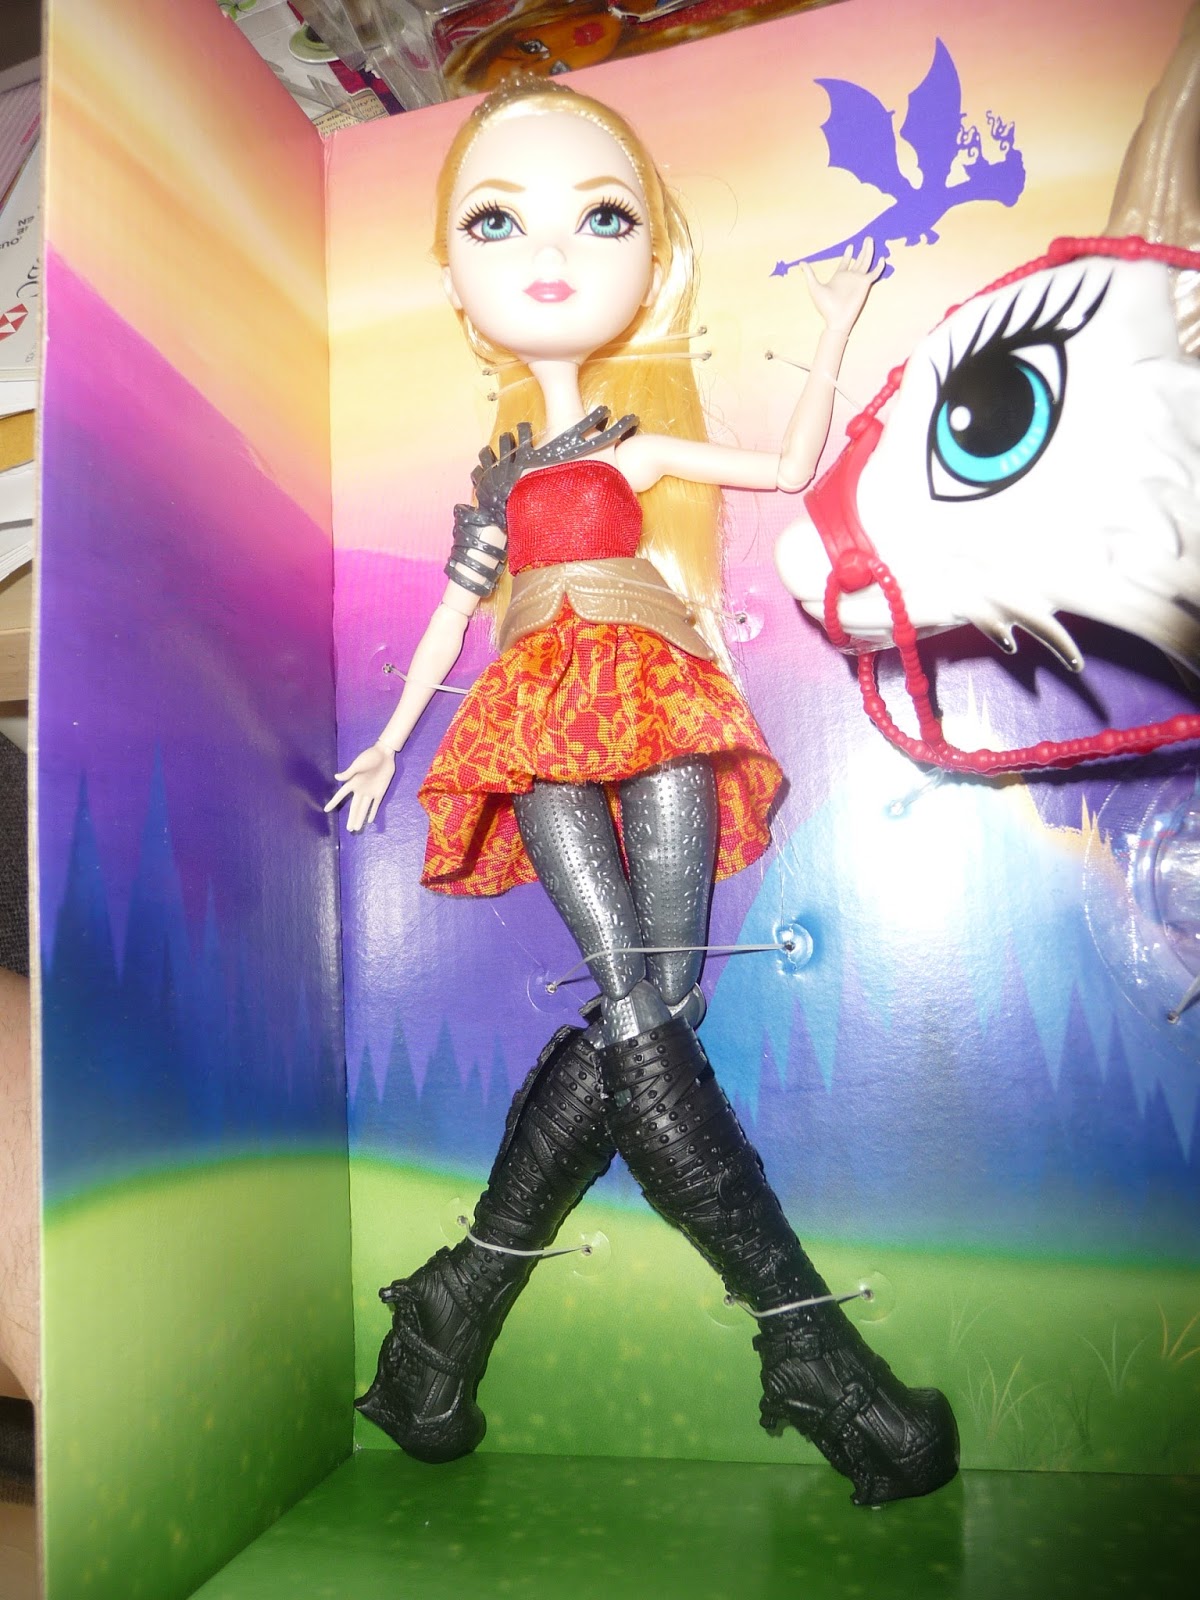 Ever After High Dragon Games Apple Whites Pet Dragon Braebyrn 12in